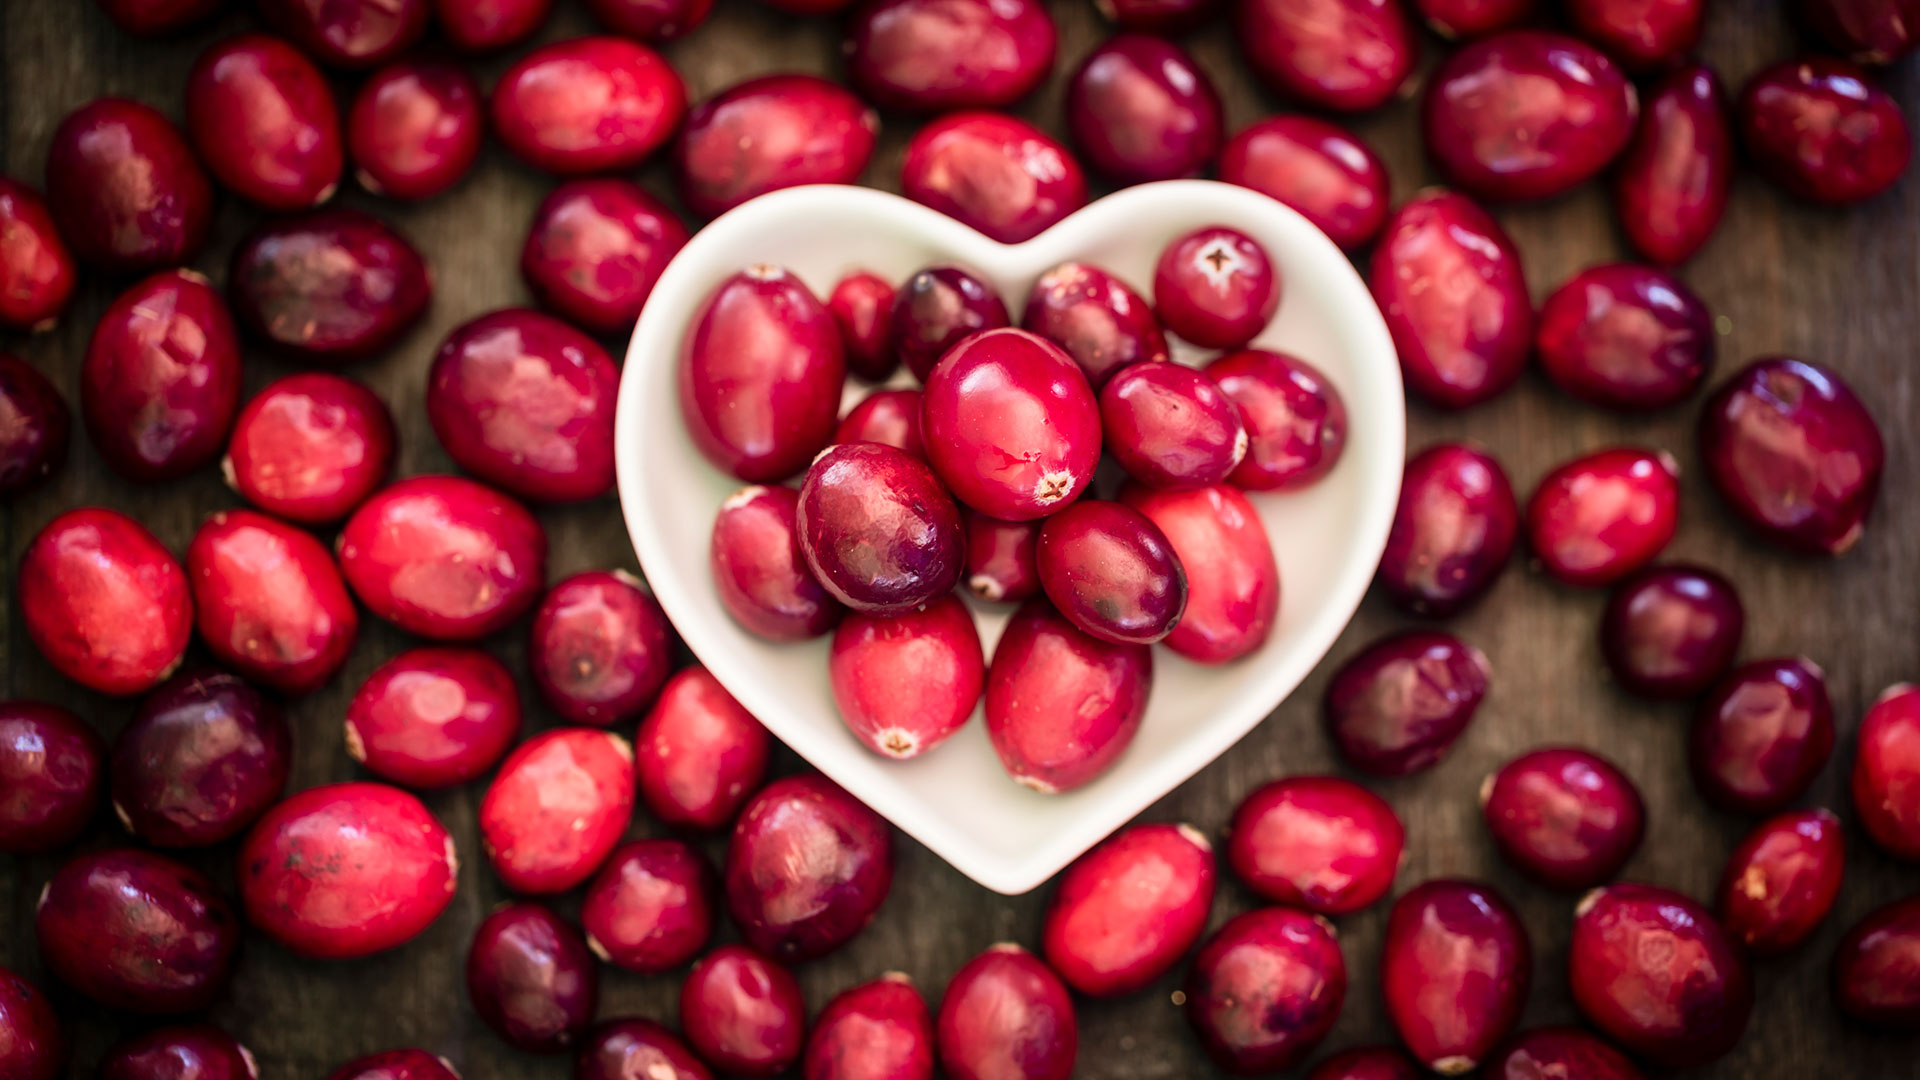 General 1920x1080 fruit cranberries red depth of field heart dishes table